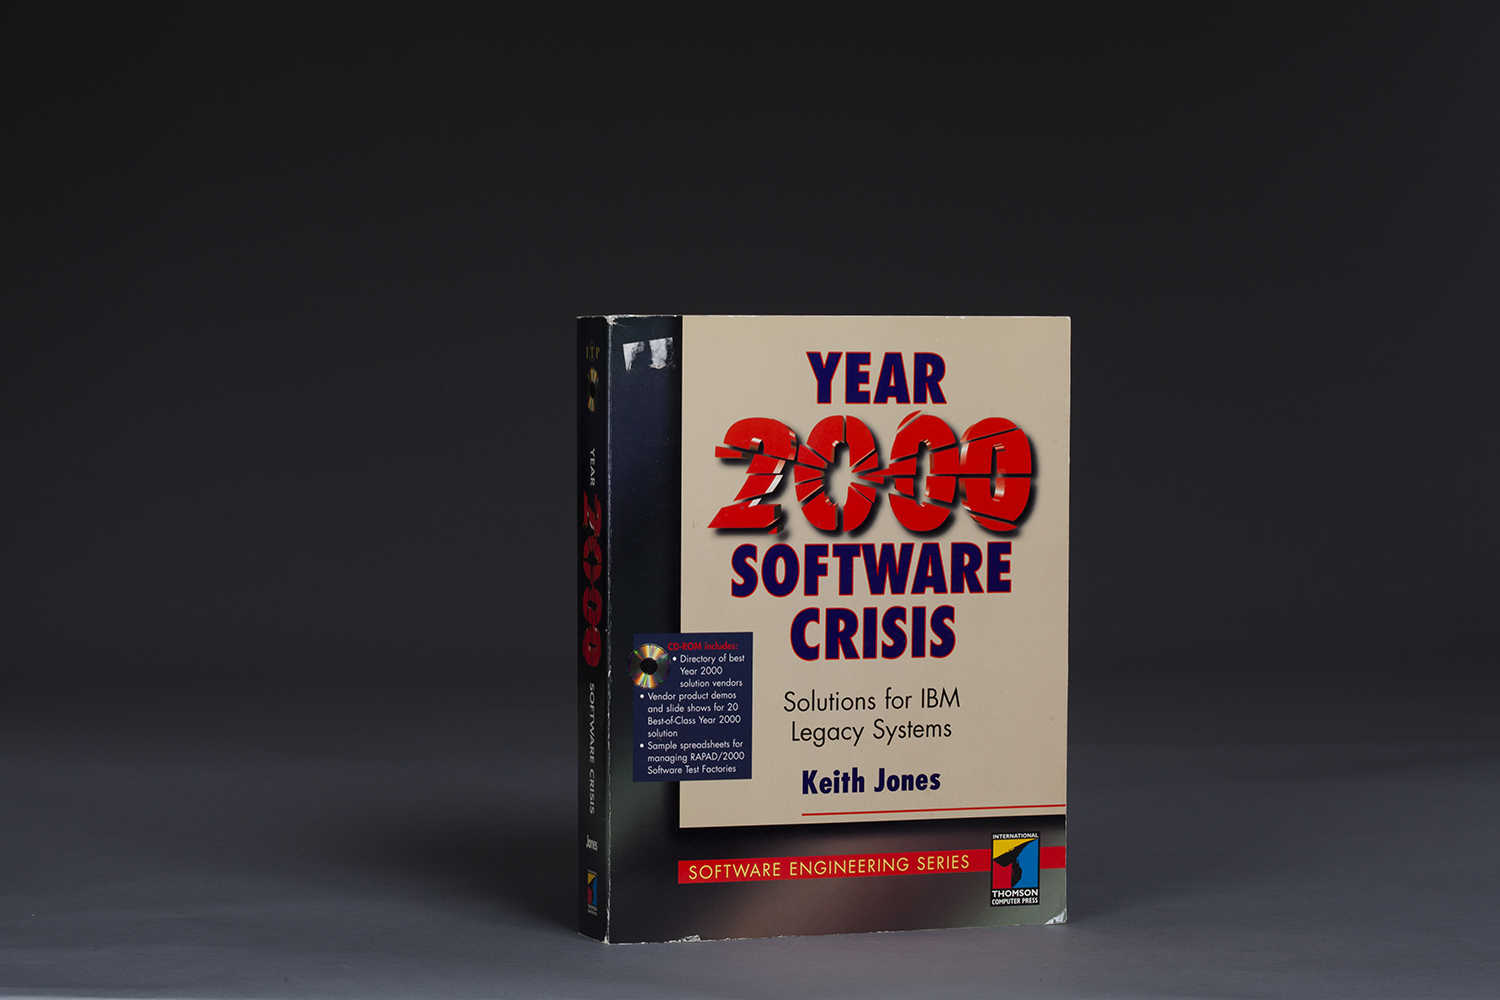 Year 2000 Software Crisis - Solutions for IBM Legacy Systems - 0662 Cover.jpg